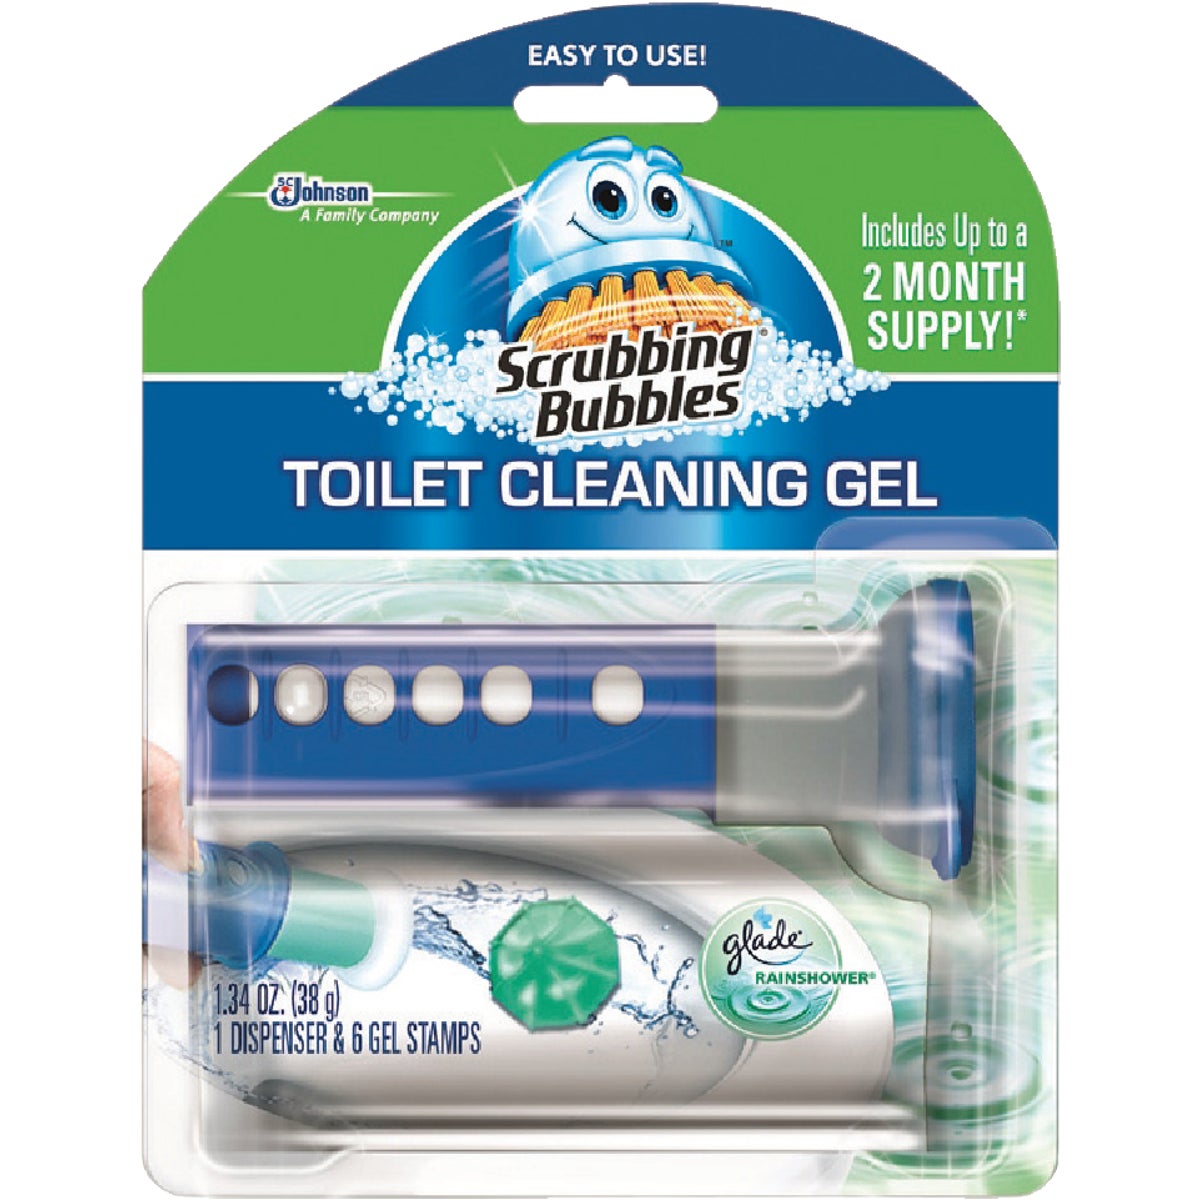 Item 613150, Scrubbing Bubbles Toilet Cleaning Gel makes a great bathroom cleaner by 